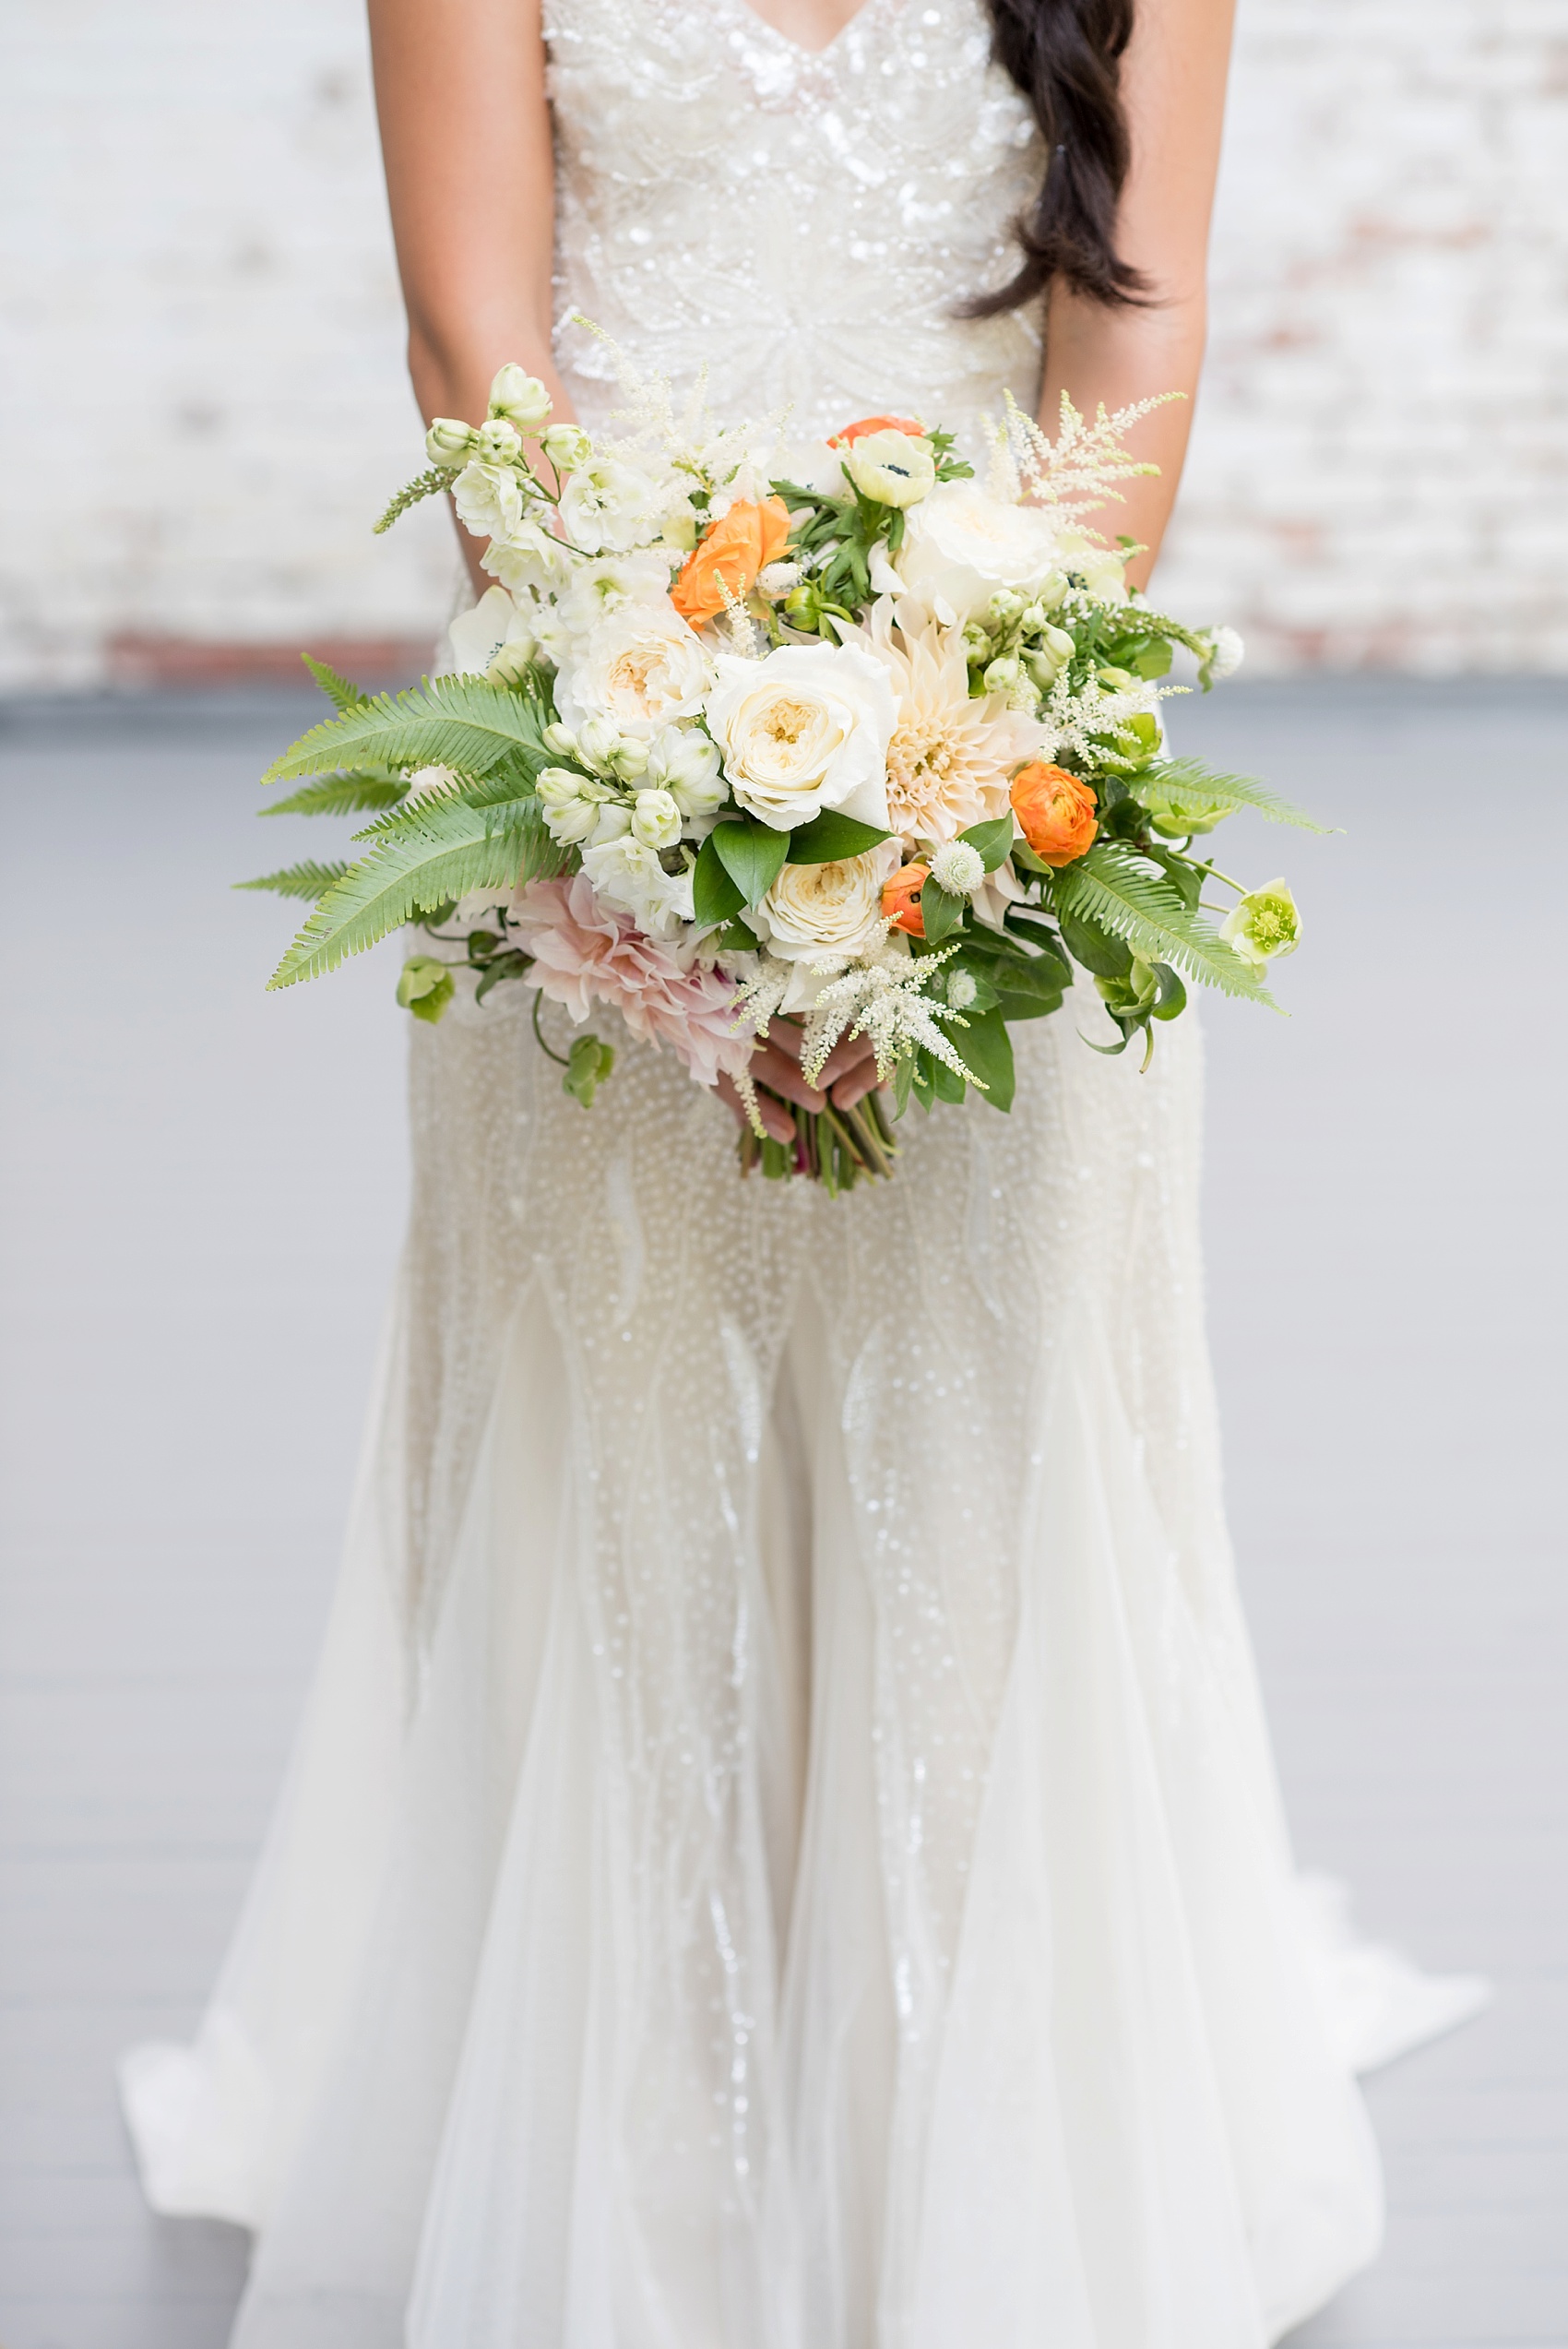 NY wedding at Southwood Estate. Images by Mikkel Paige Photography, NYC wedding photographer. Beaded wedding gown and wildflower bouquet of white, blue, green and orange by Sachi Rose.